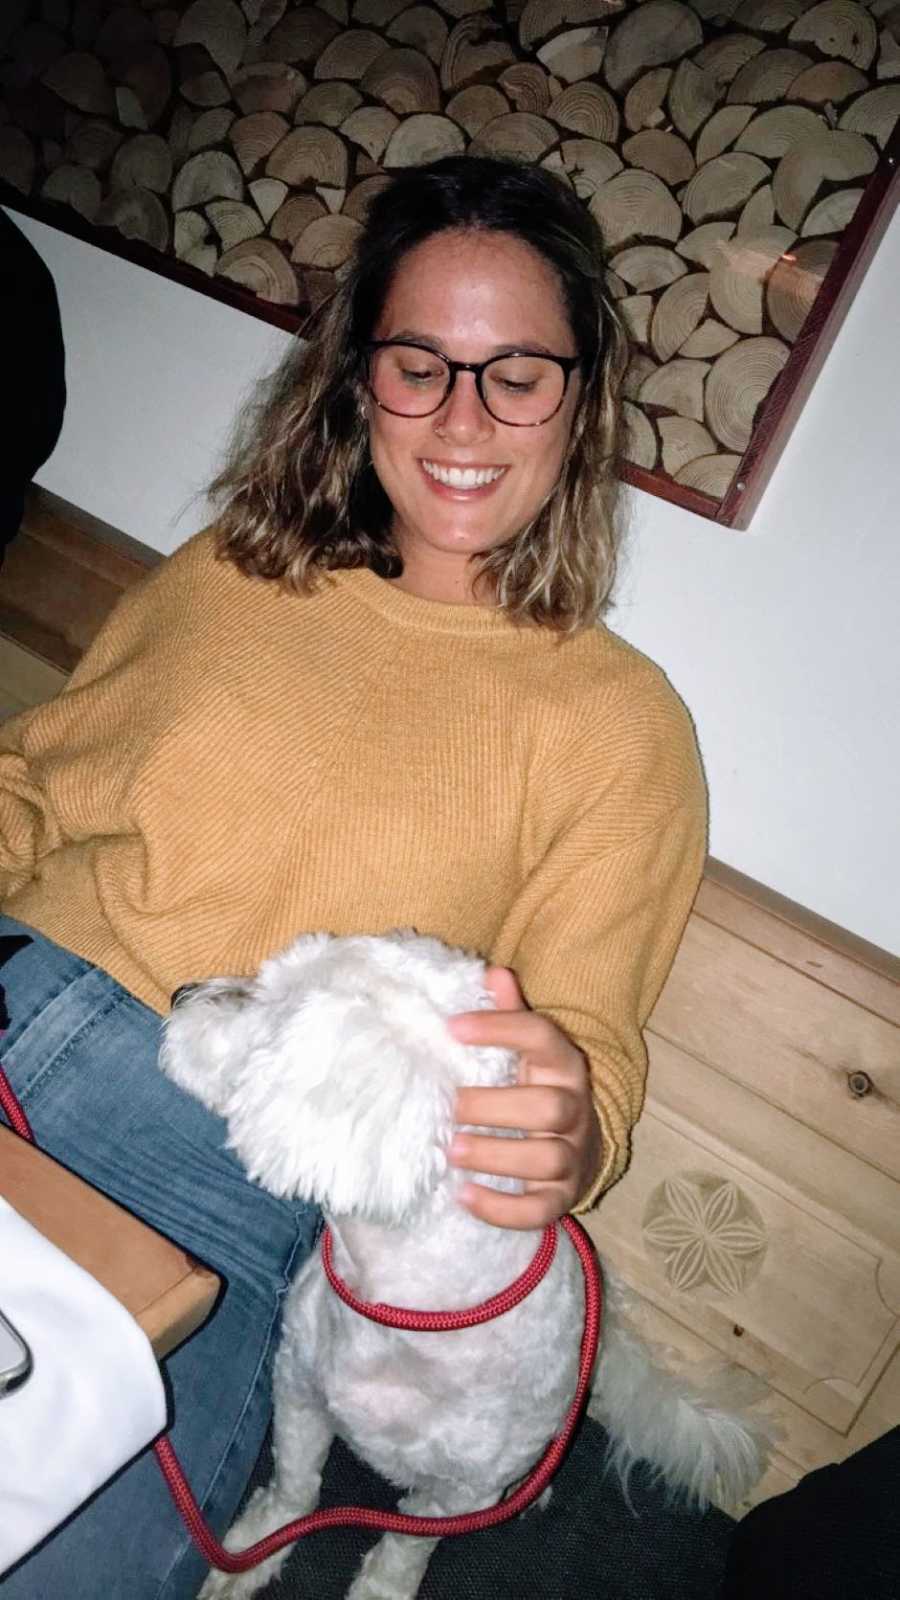 Woman in yellow sweater smiles down at a white dog while petting it